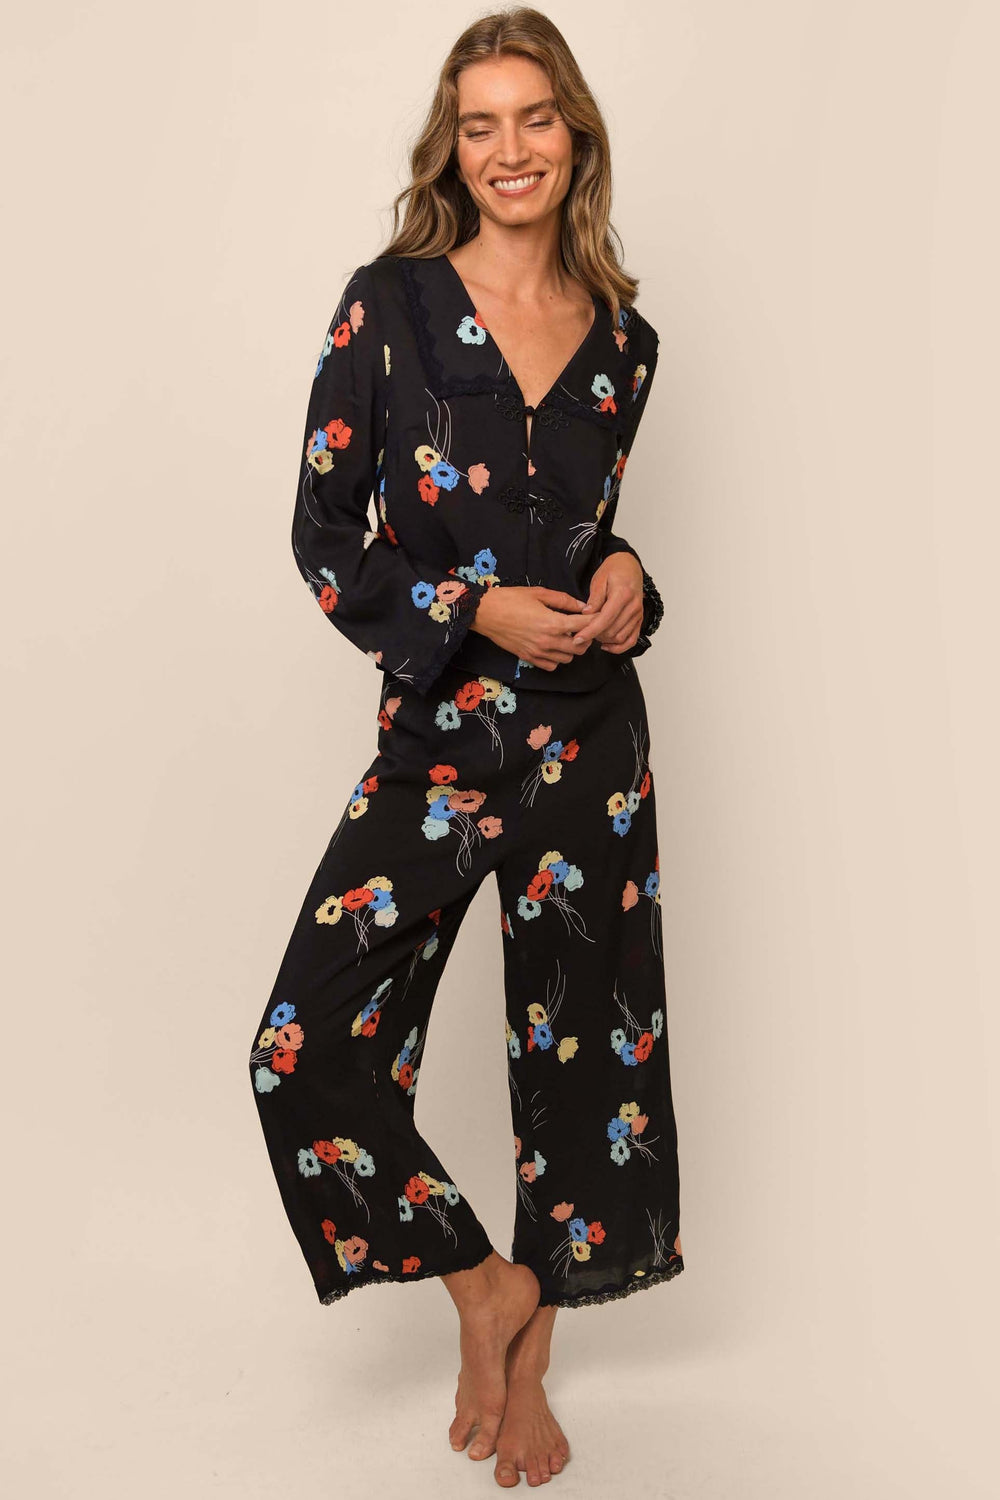 The Rixo Annabelle pyjamas' hand-painted carnations make us look forward to bedtime, and her statement collar and smart cut make her delectable loungewear any day.